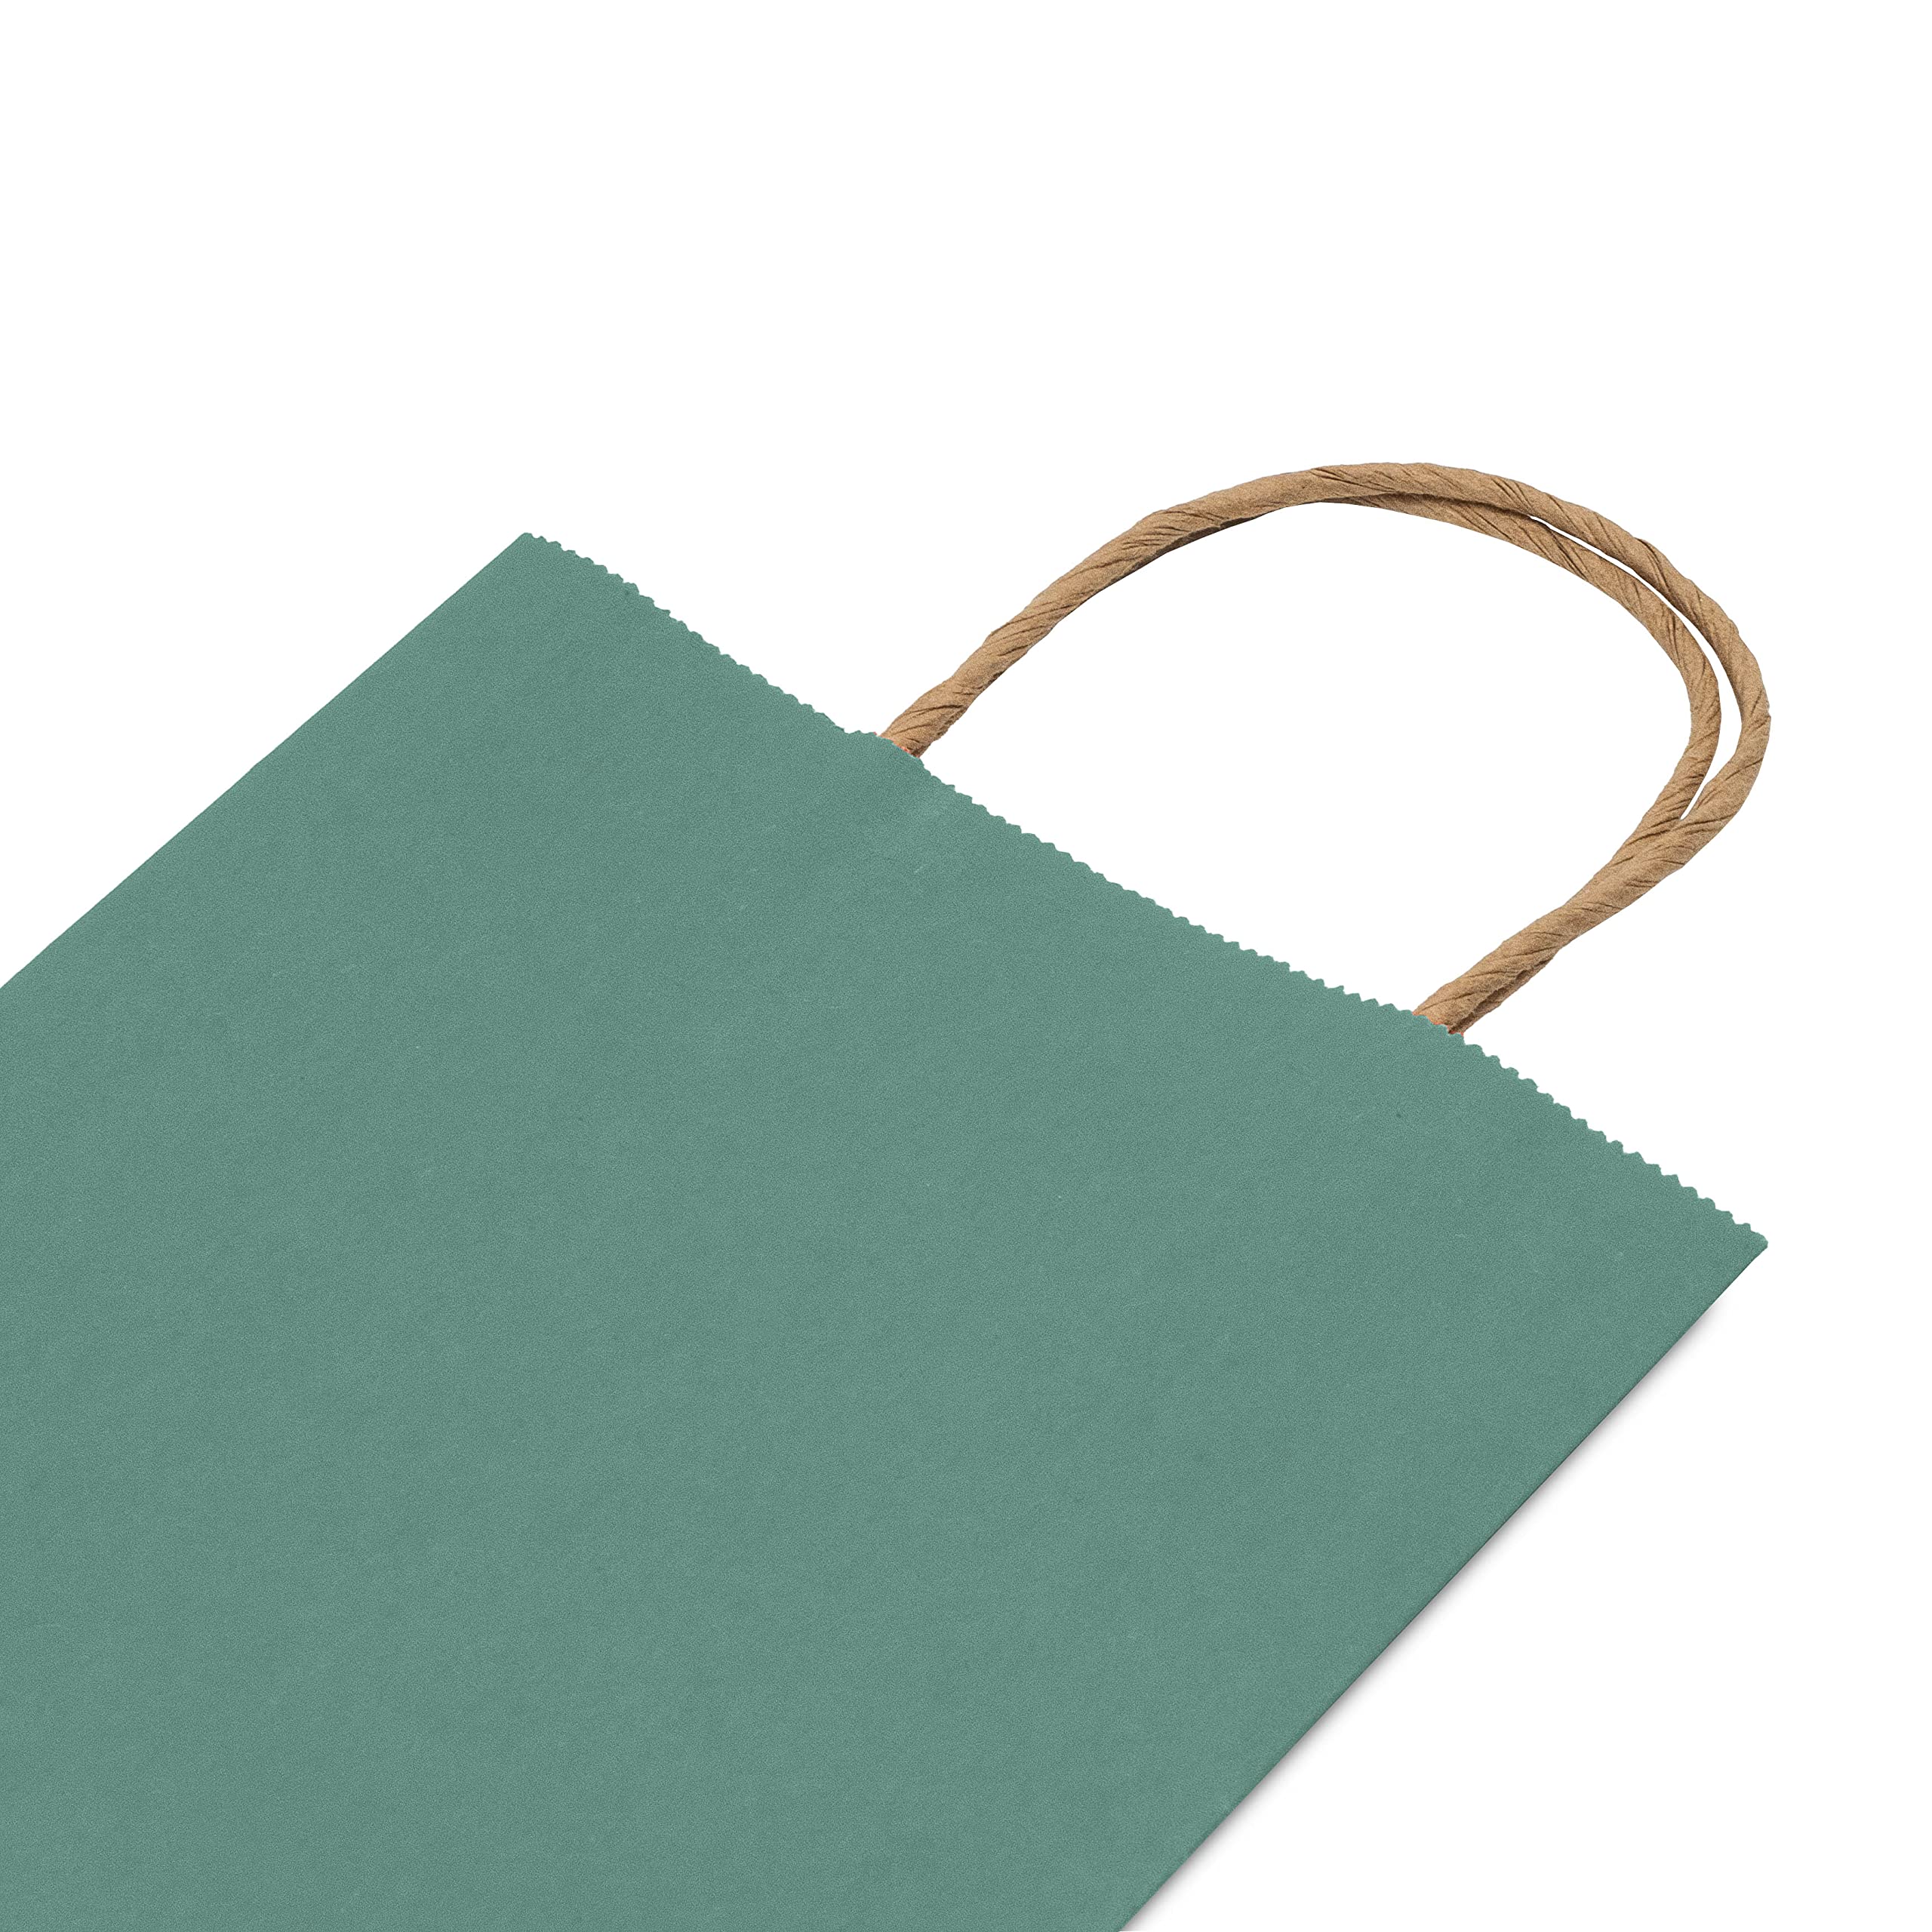 Green Gift Bags - 6x3x9 Inch 100 Pack Small Kraft Paper Shopping Bags with Handles, Craft Totes in Bulk for Boutiques, Small Business, Retail Stores, Birthday Parties, Jewelry, Merchandise, Bulk  - Like New